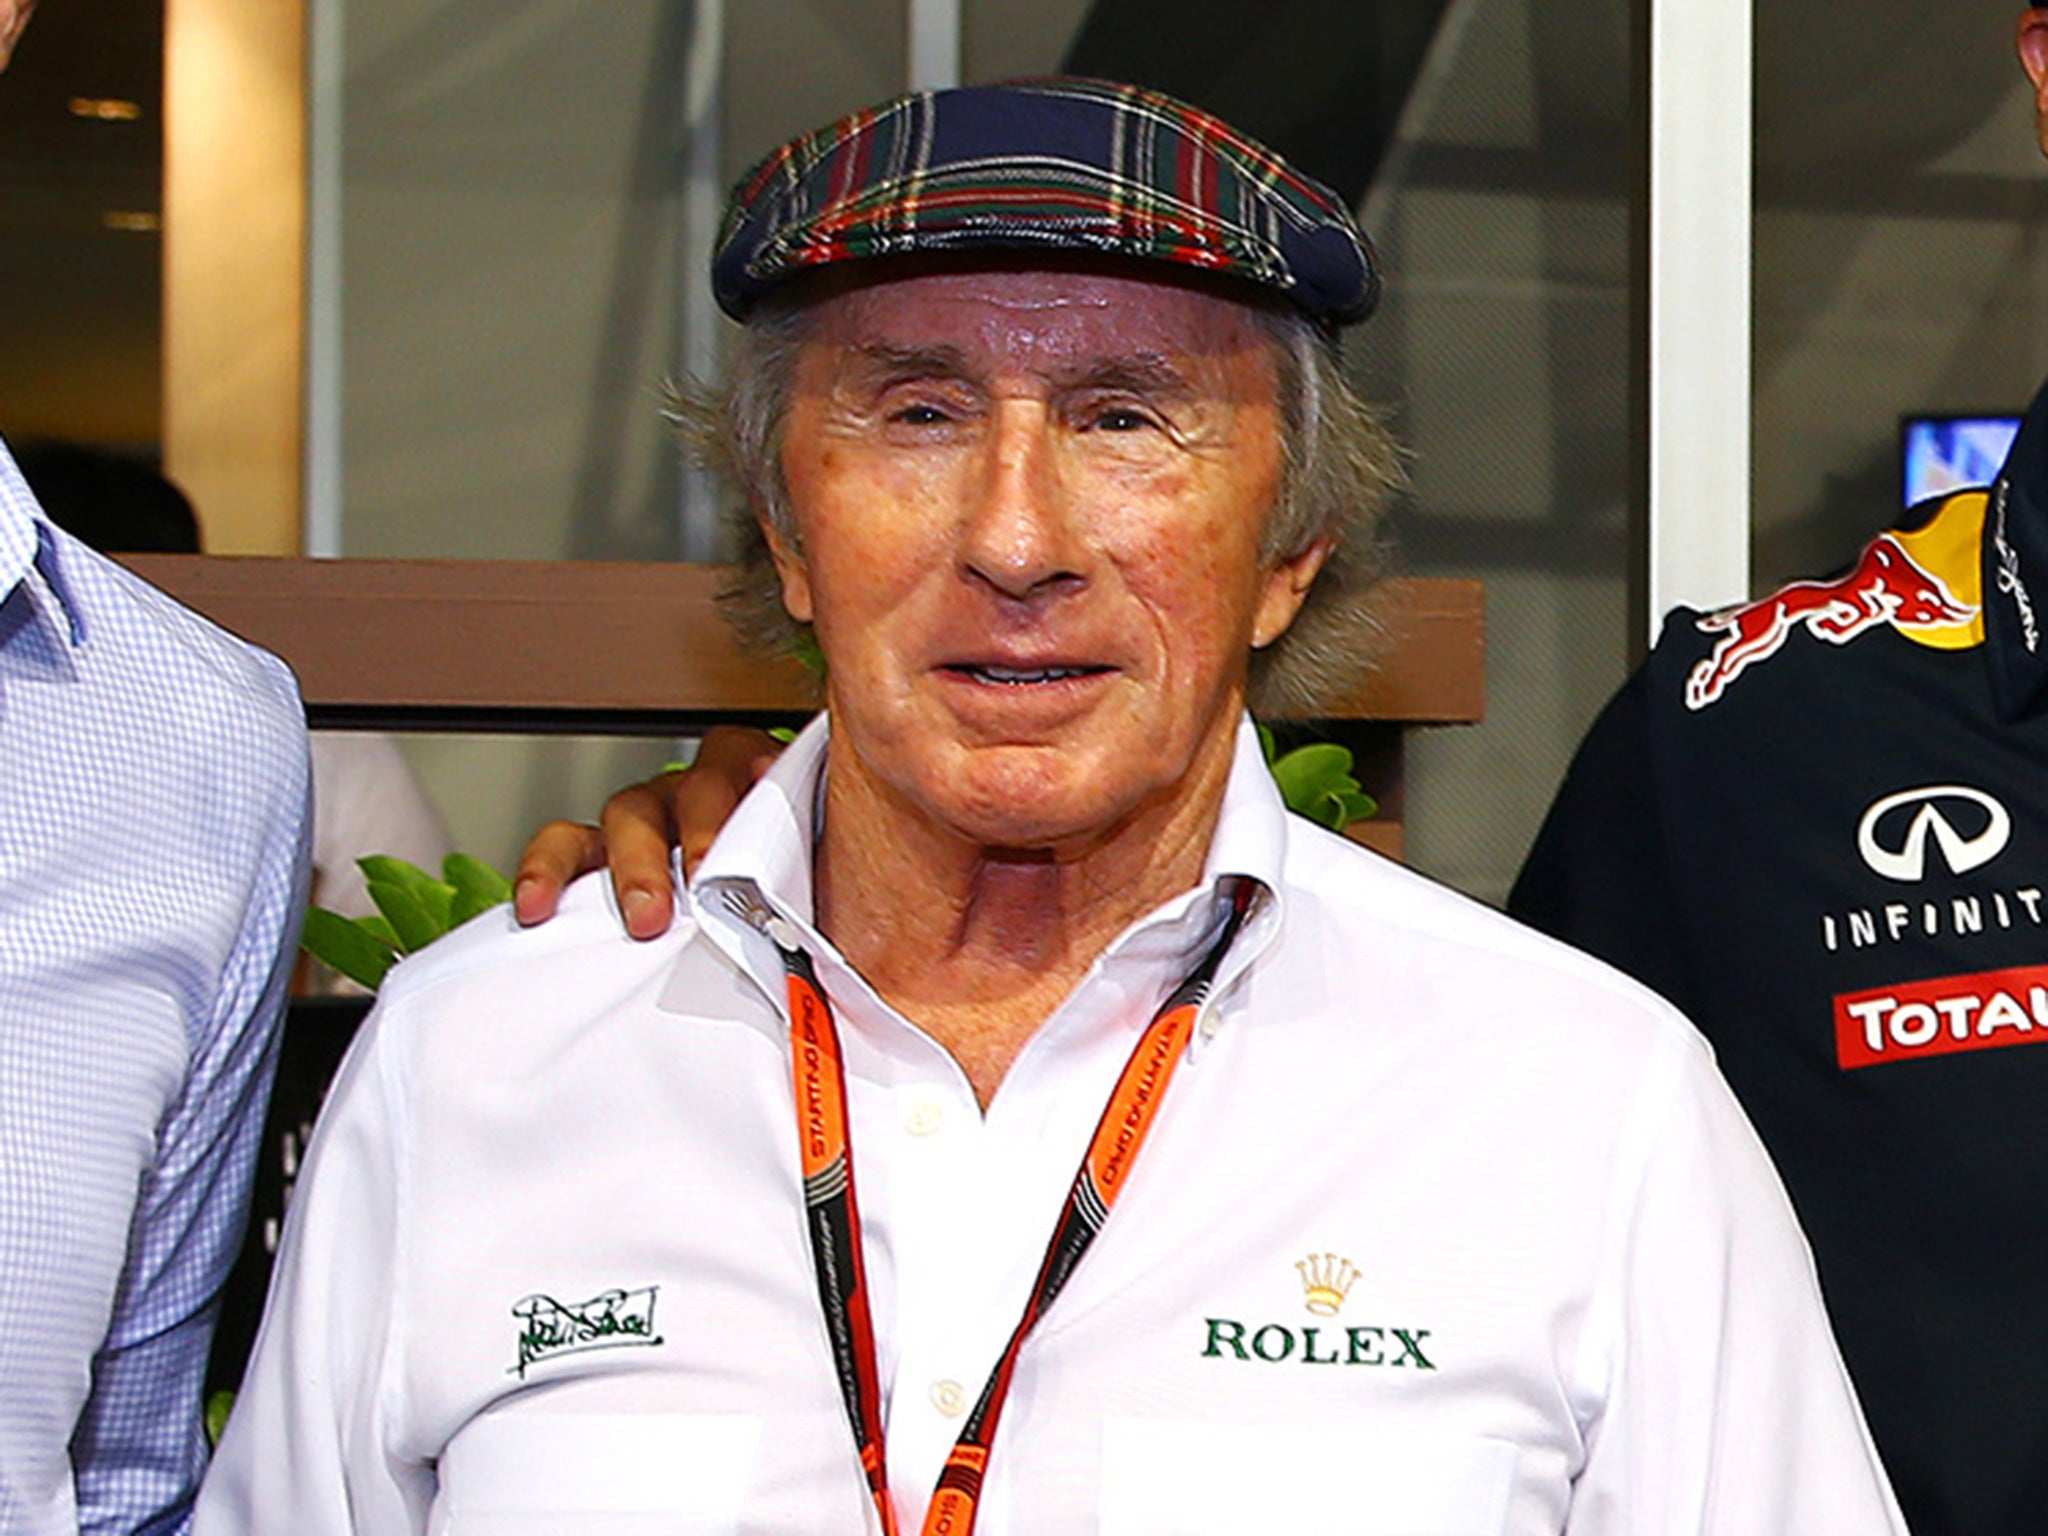 Sir Jackie Stewart tried to persuade the Mexico City crowd to stop sitting at the edge of the track